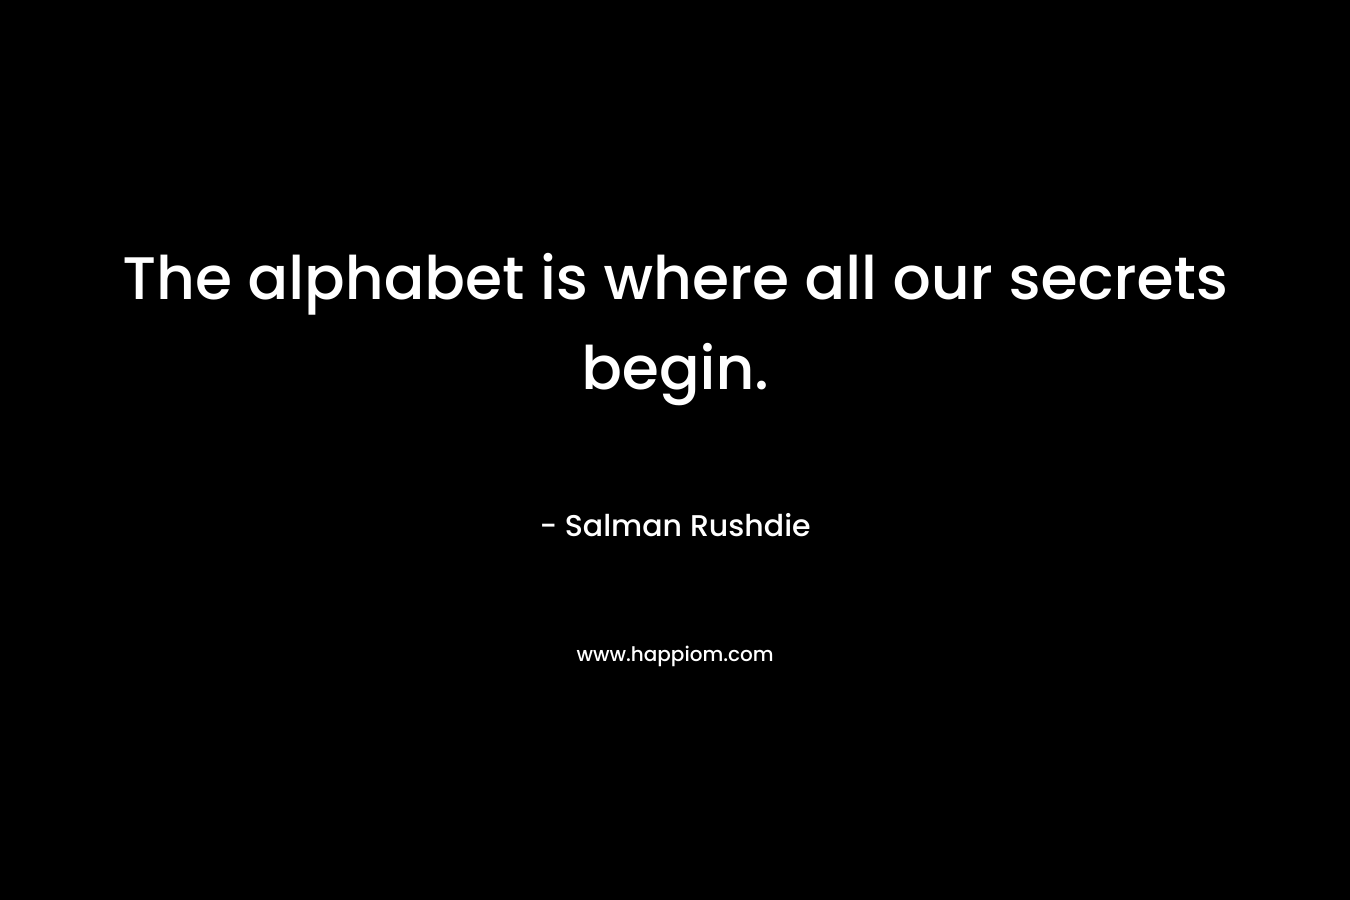 The alphabet is where all our secrets begin.